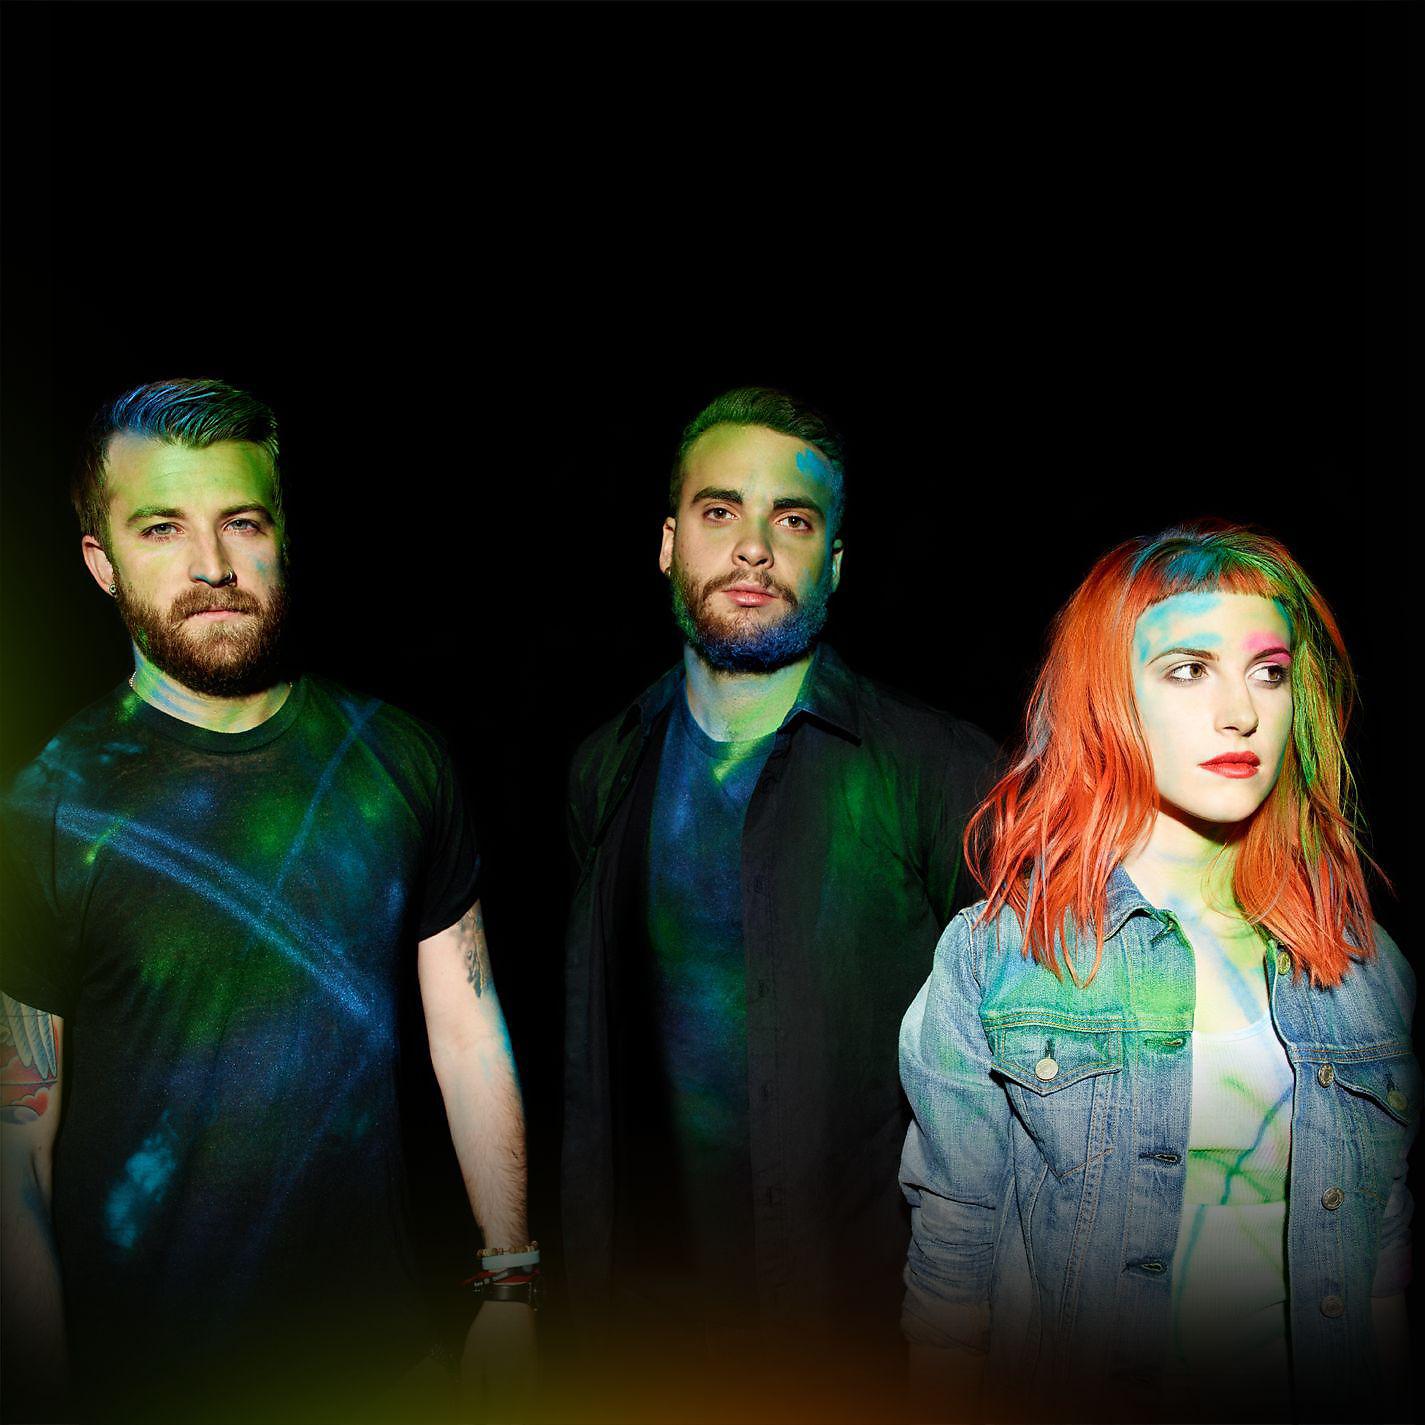 I am not angry anymore. Группа Paramore 2022. Paramore Riot обложка. Группа Paramore 2007. Paramore обложки альбомов.